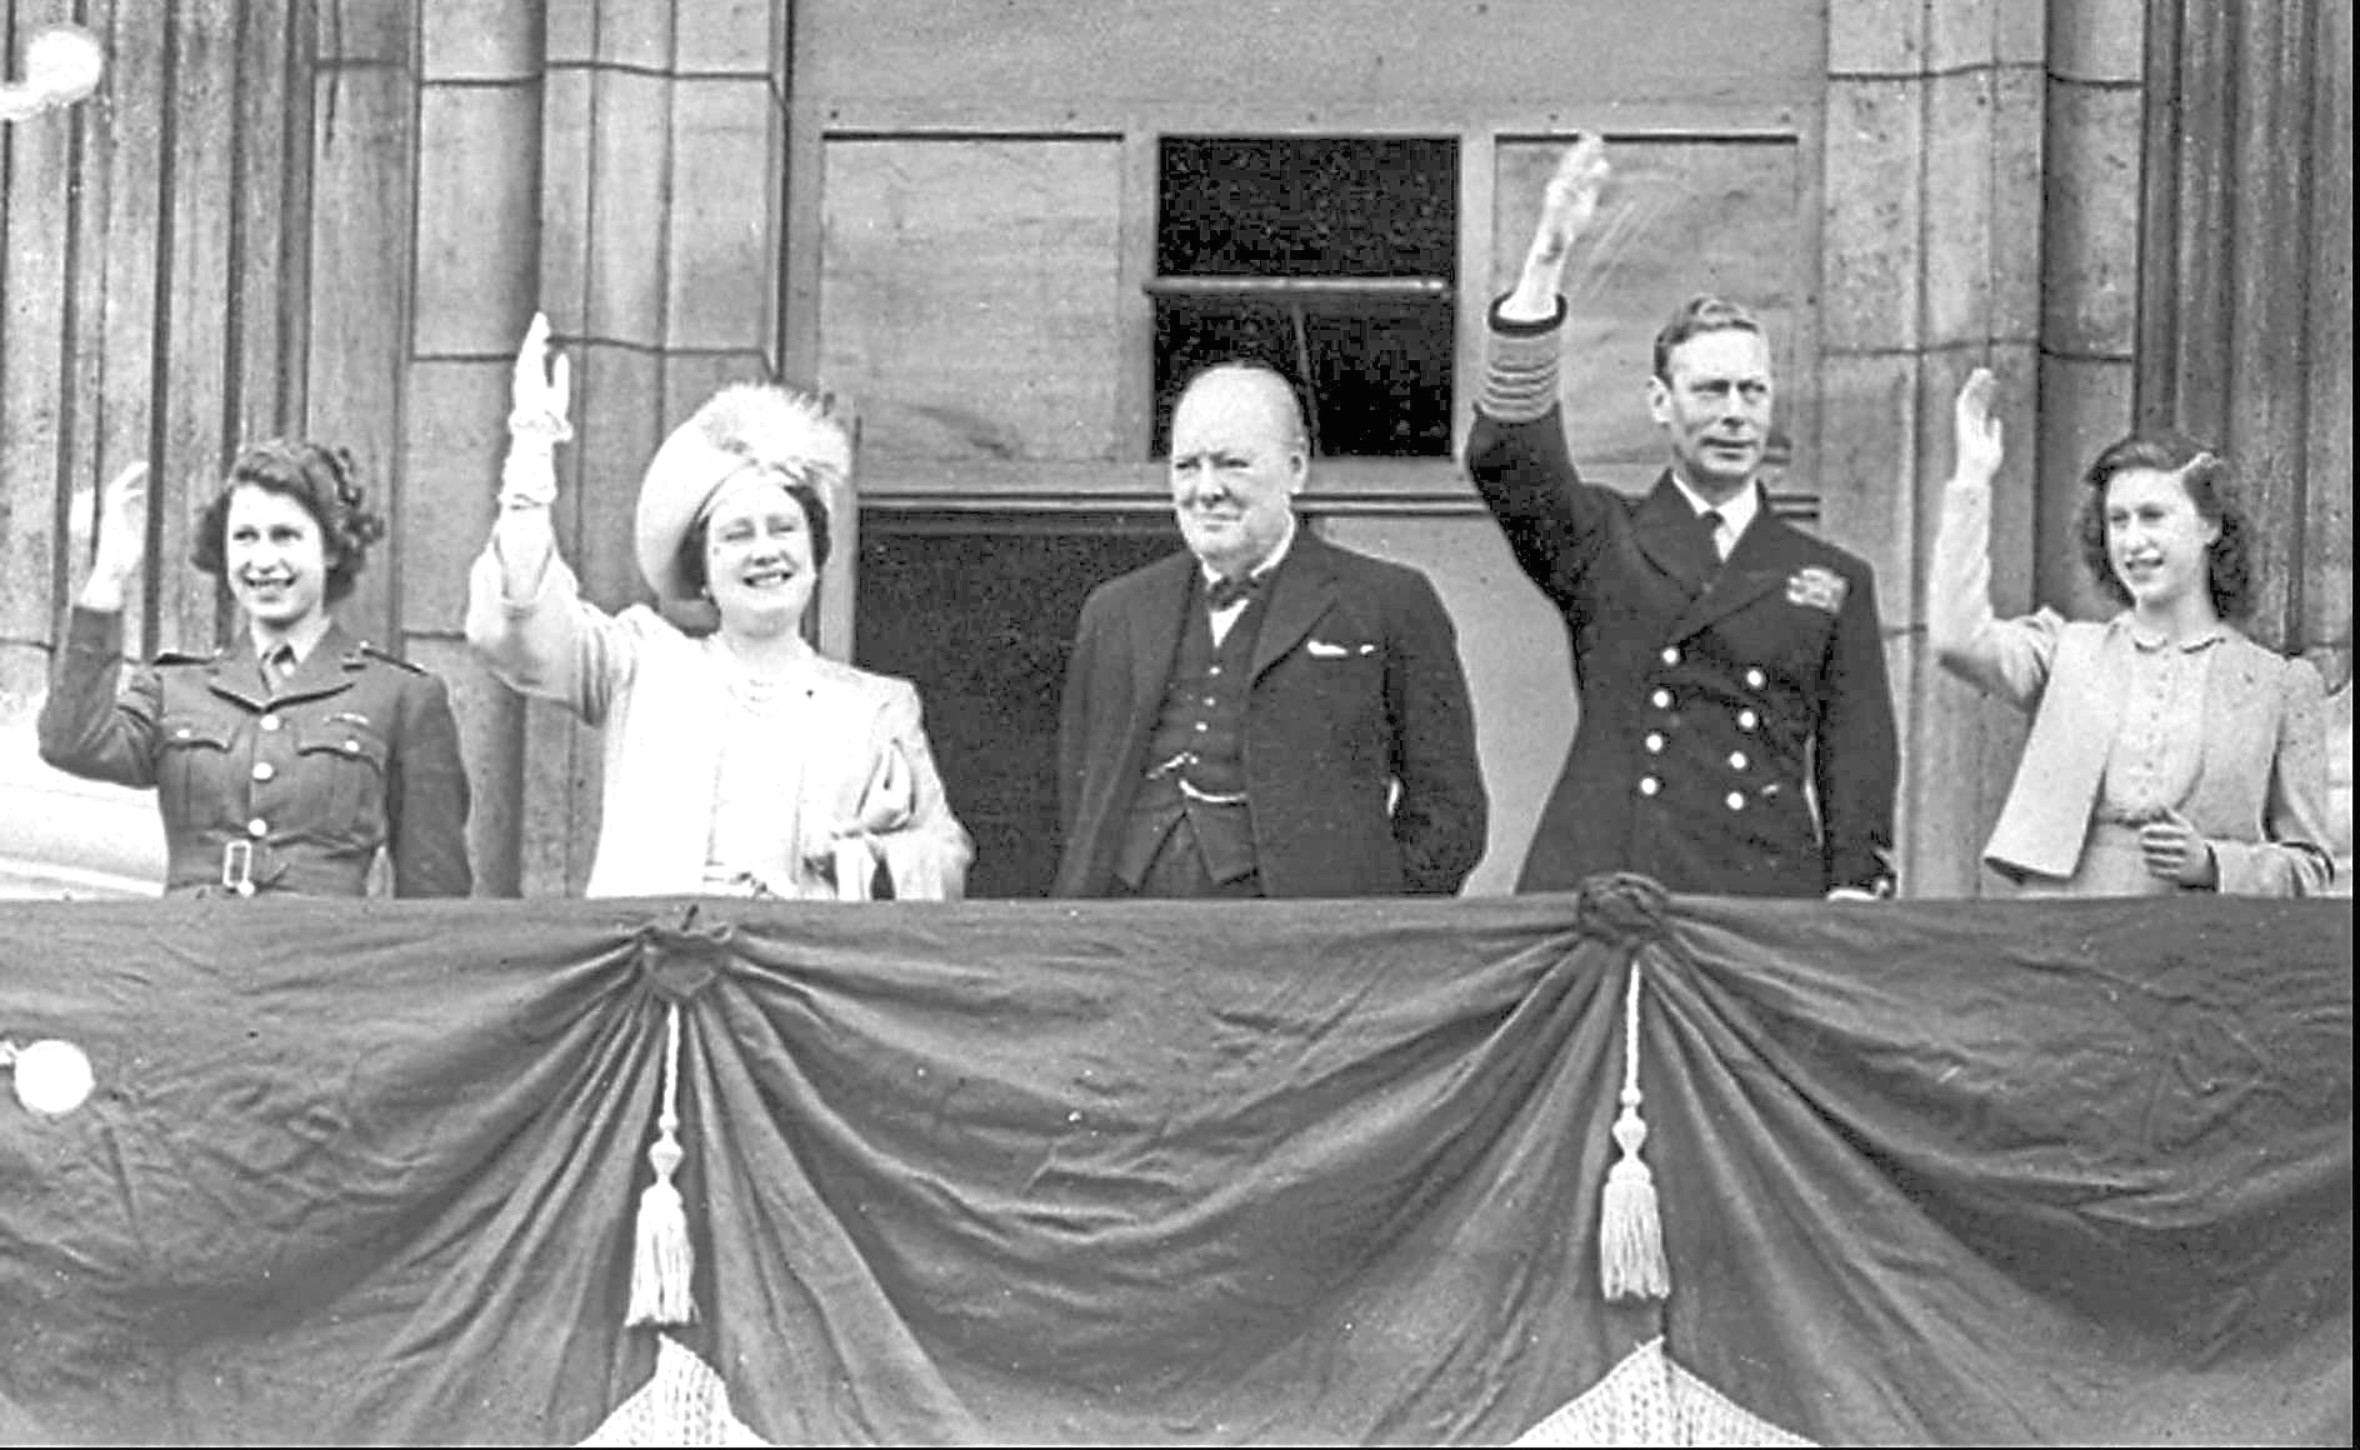 On the balcony at Buckingham Palace overseeing VE Day celebrations are Princess Elizabeth, Queen Elizabeth, Prime Minister Winston Churchill, King George VI and Princess Margaret